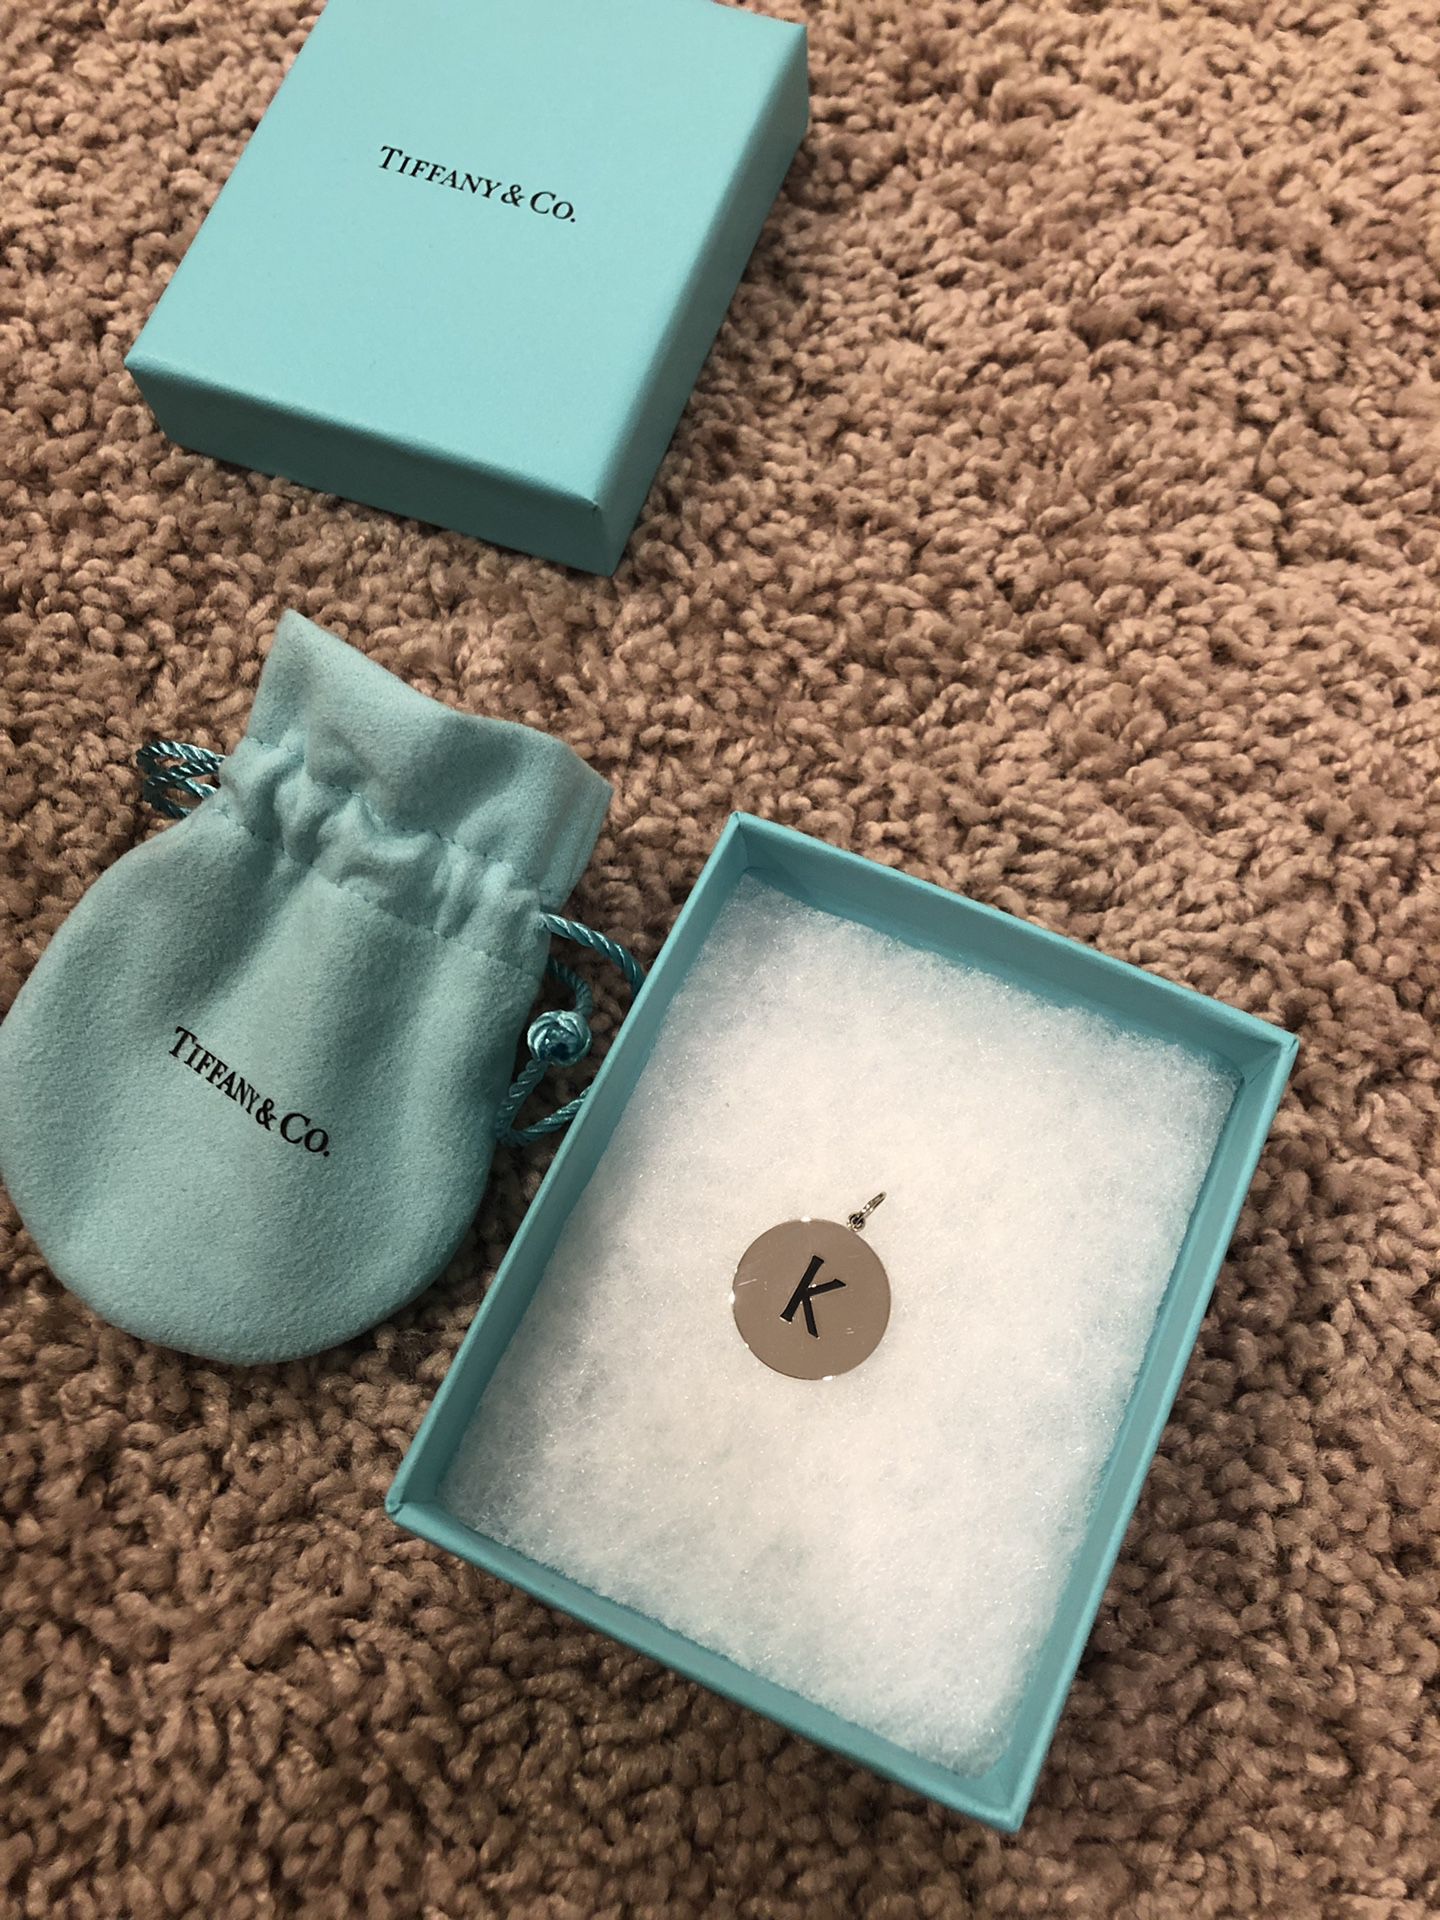 Tiffany & Co Necklace pendent